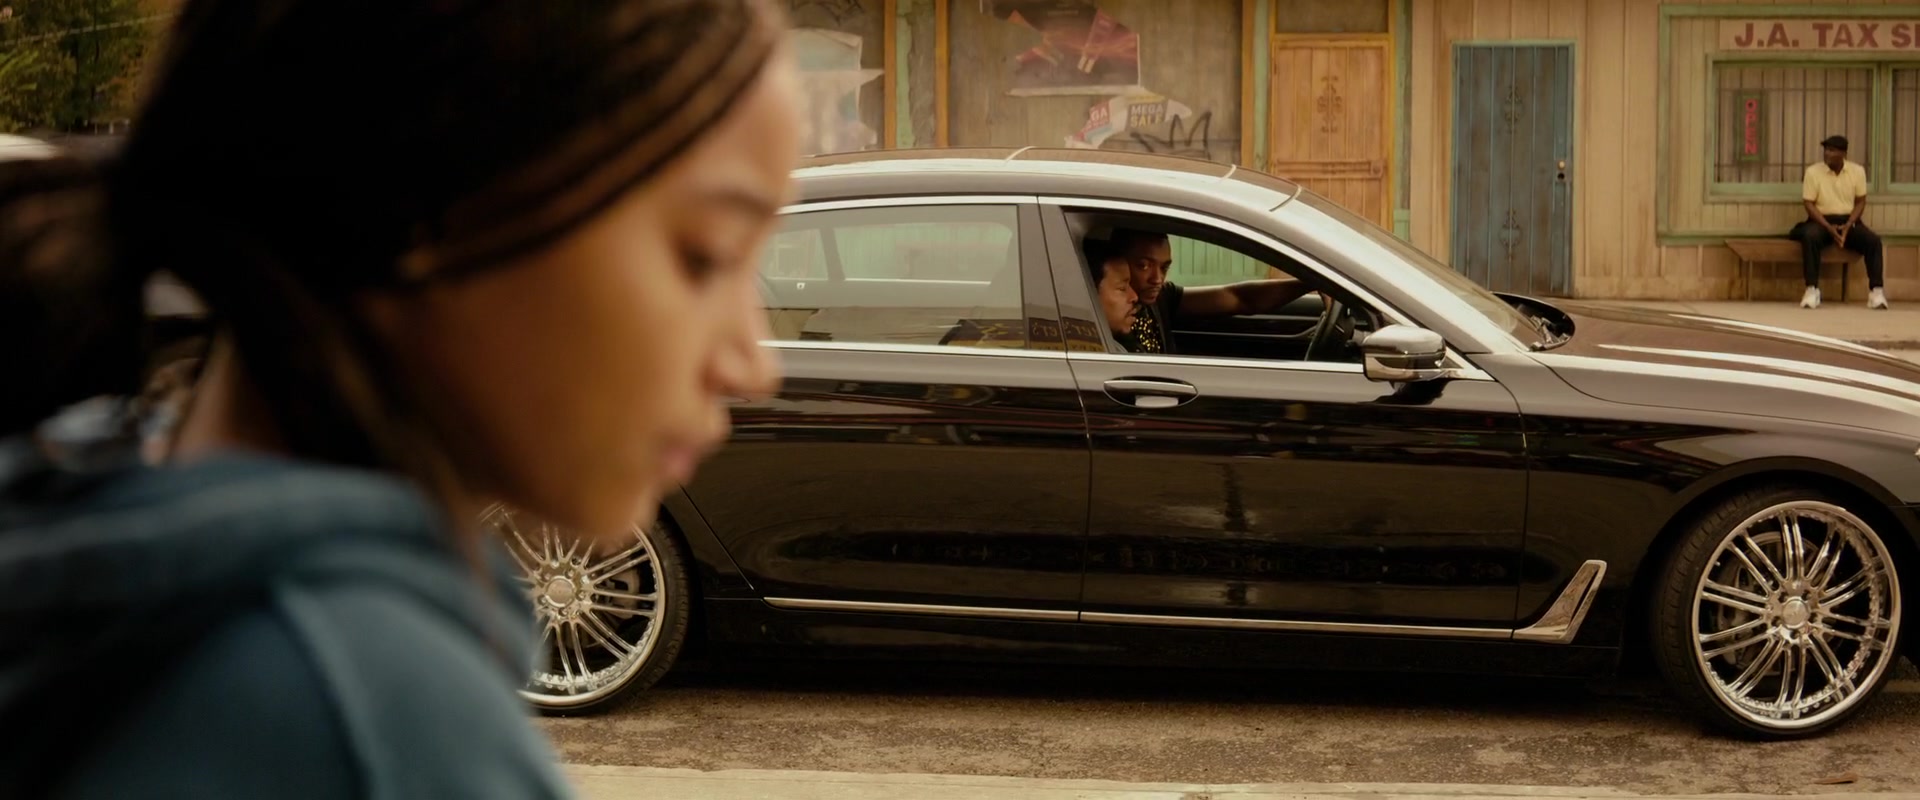 BMW 7 Series Car Driven by Anthony Mackie in The Hate U Give (2018) Movie1920 x 800